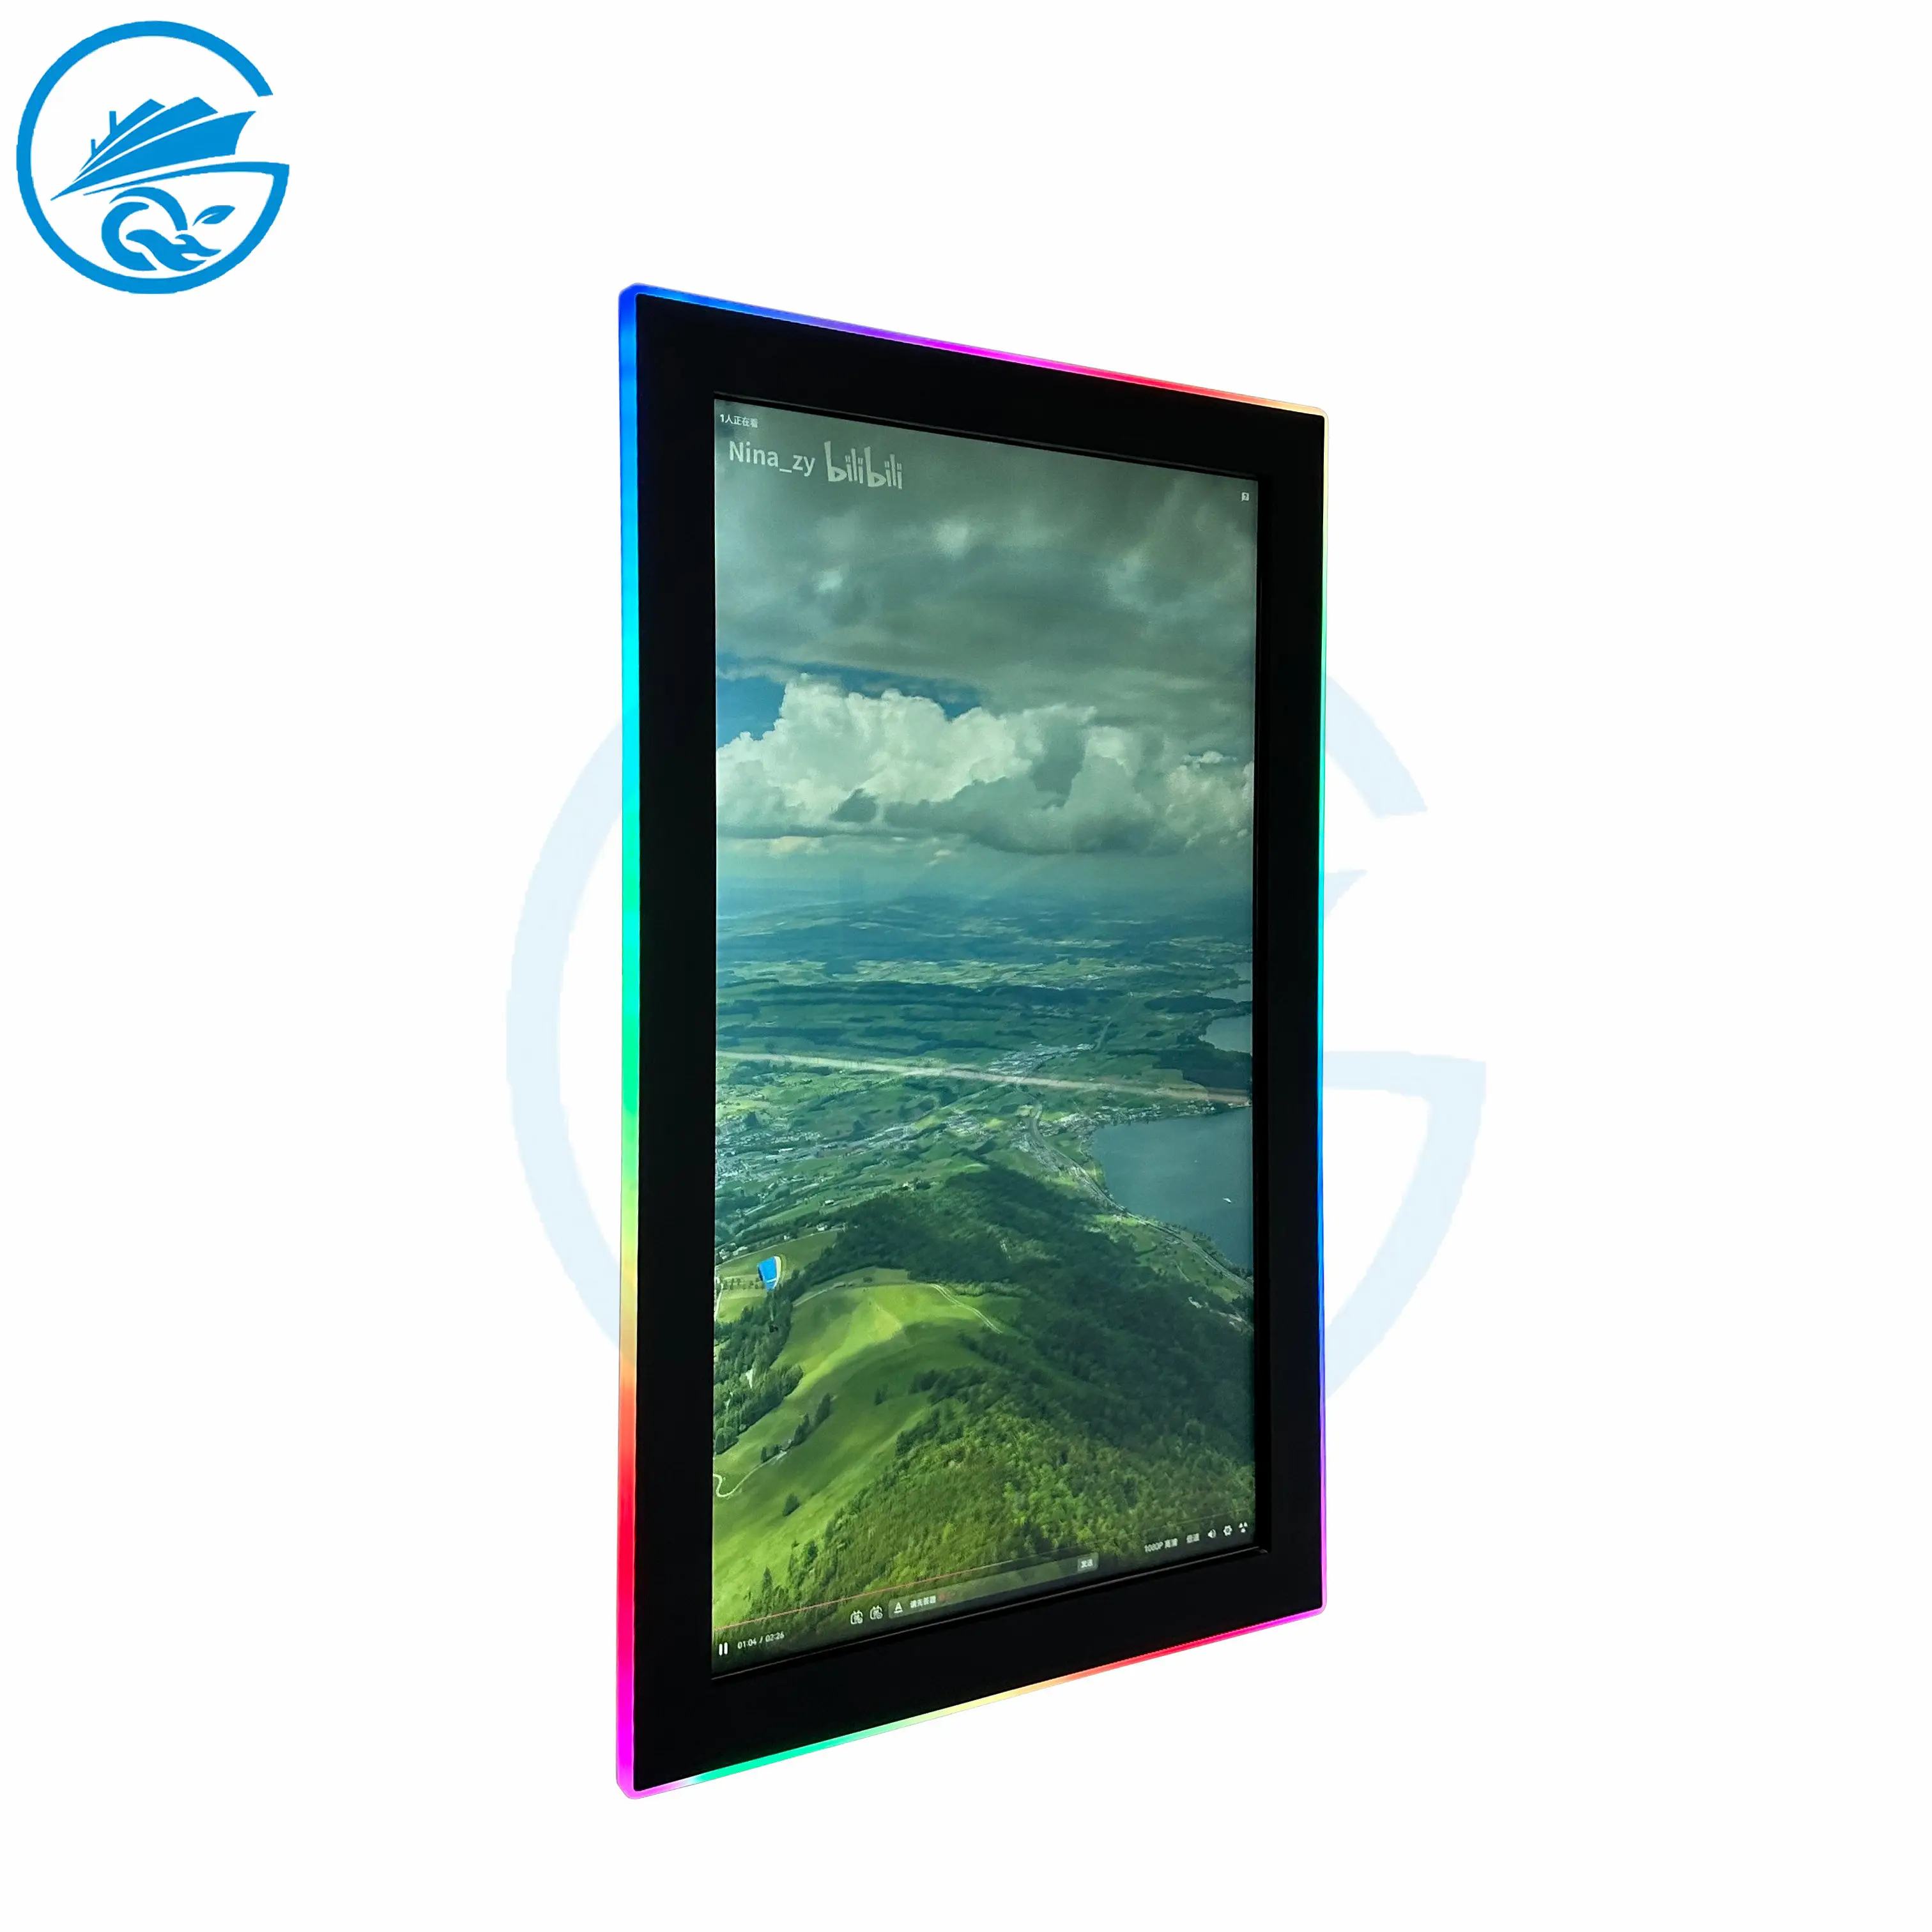 43 inch Acrylic led light bezel vertical infrared open frame touch screen monitor